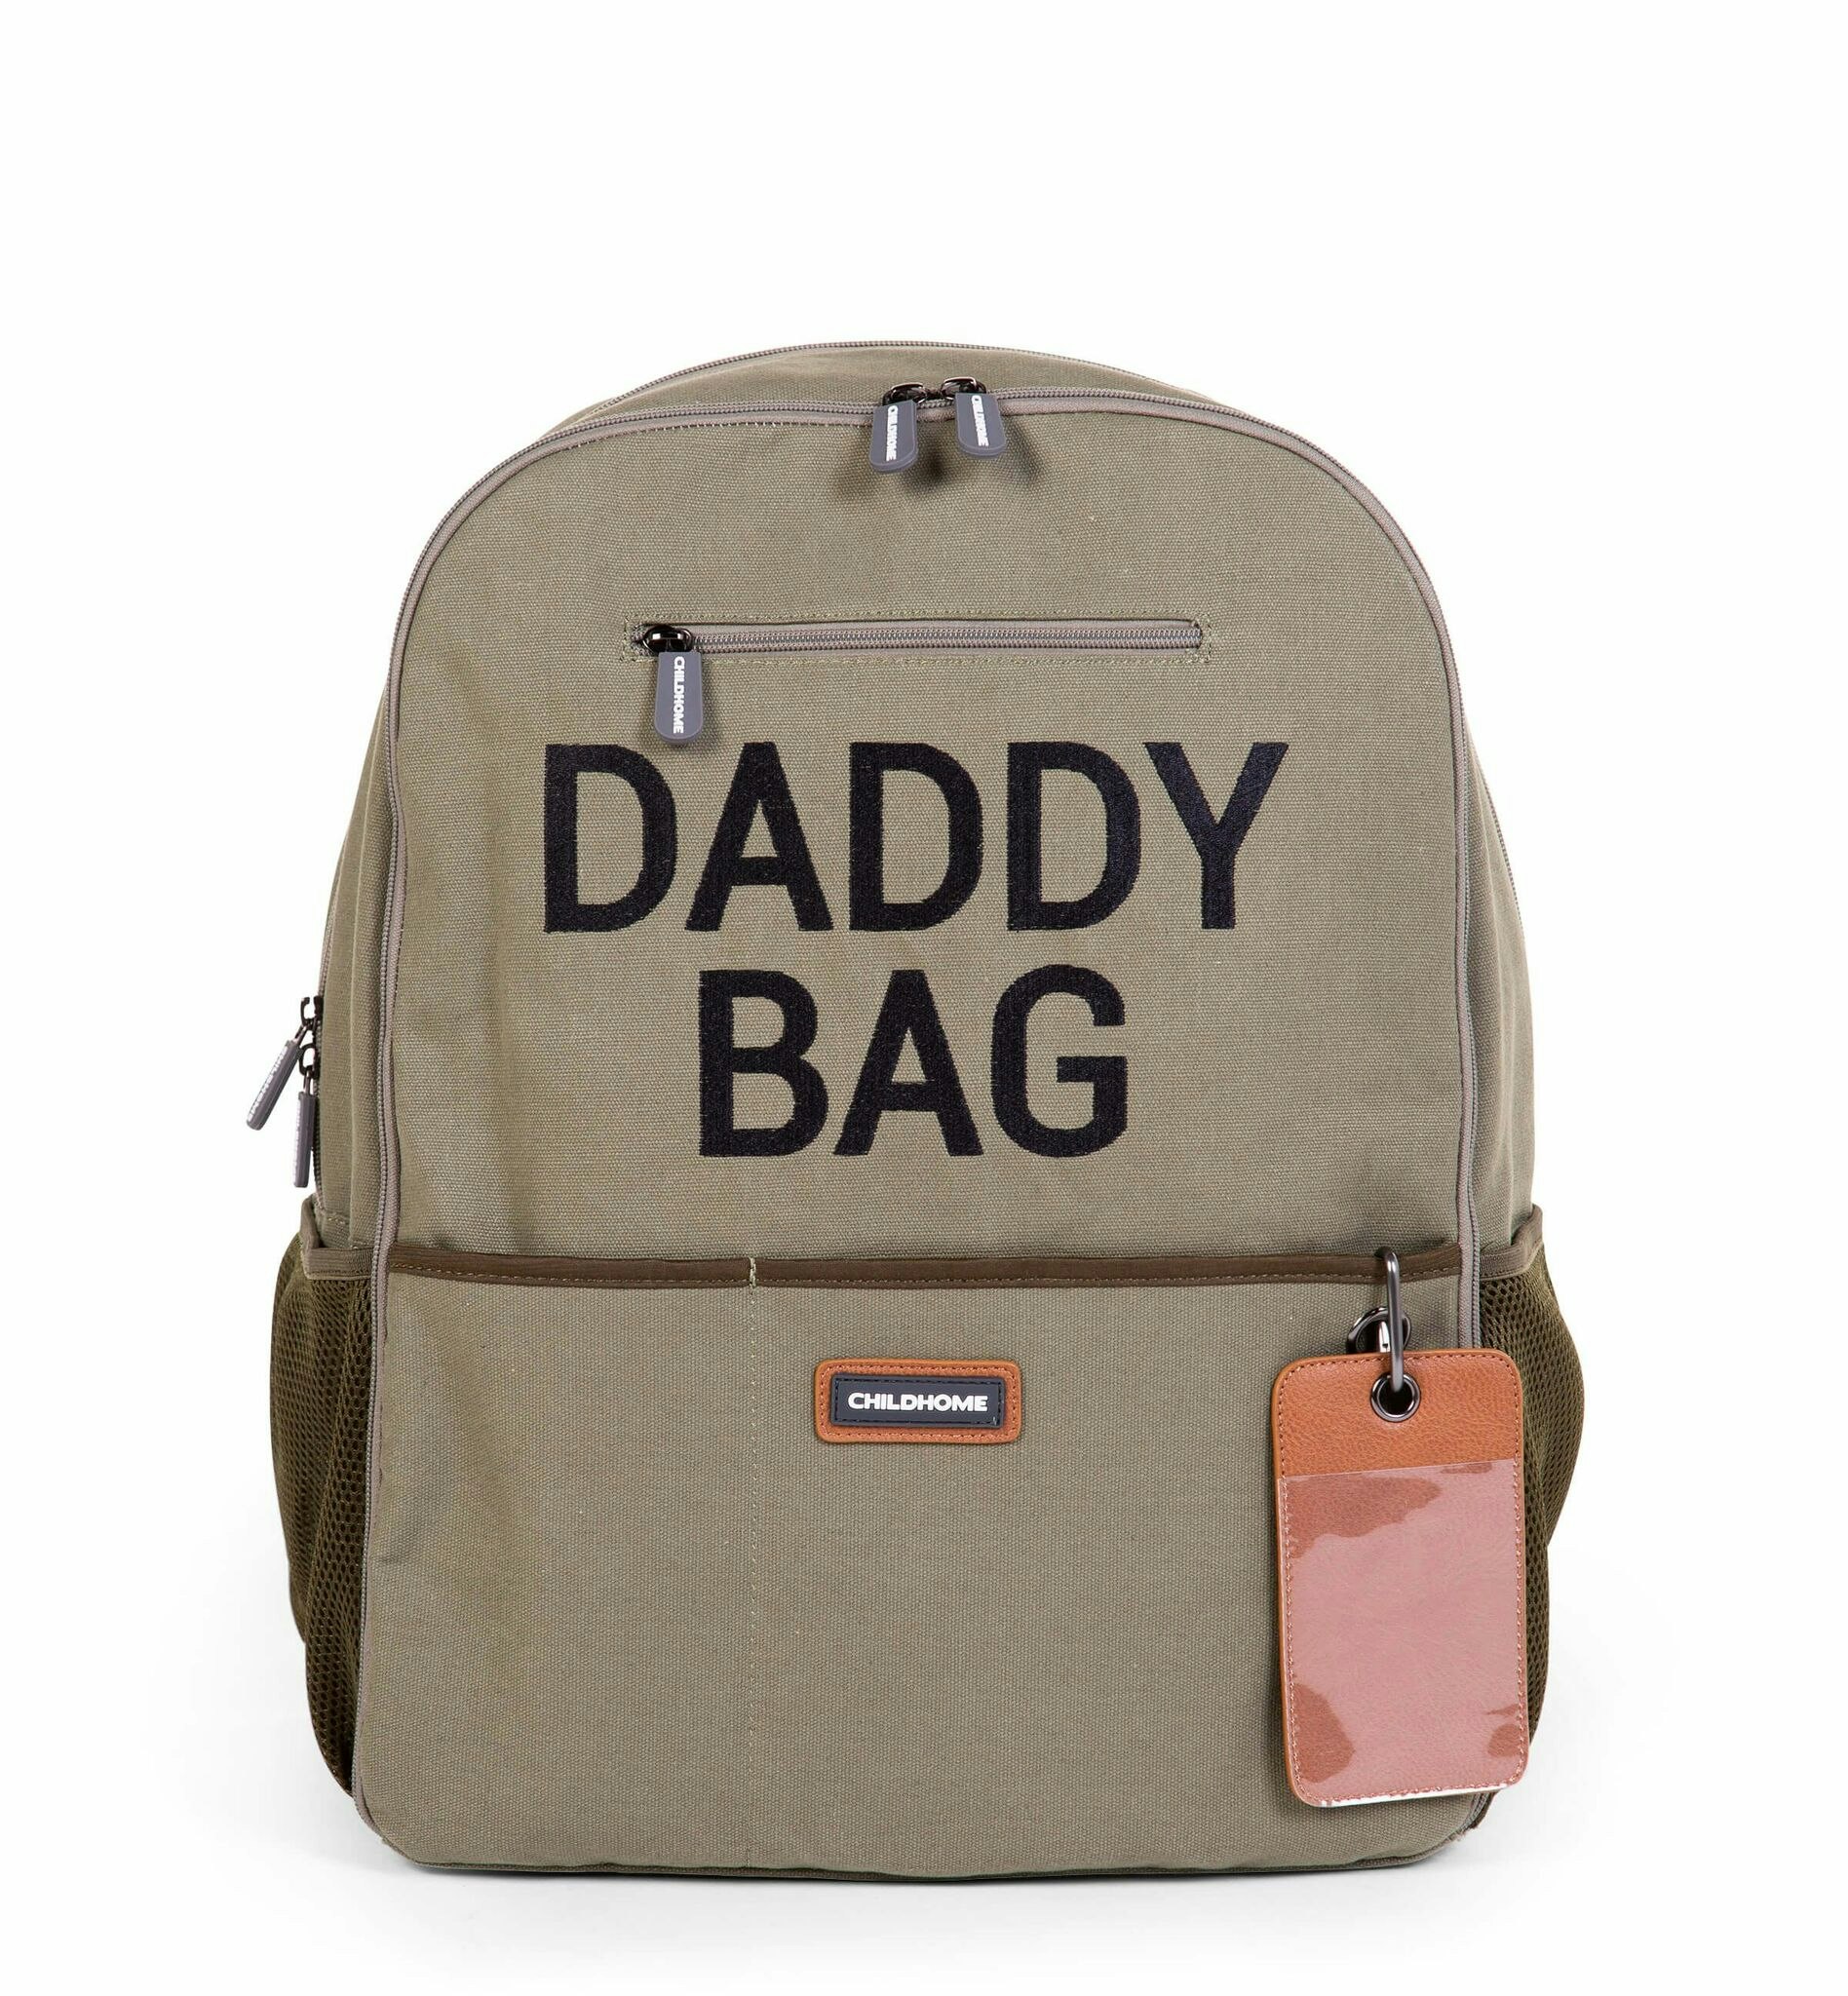 DADDY BAG CARE BACKPACK - CANVAS - KHAKI - BaBa Baby